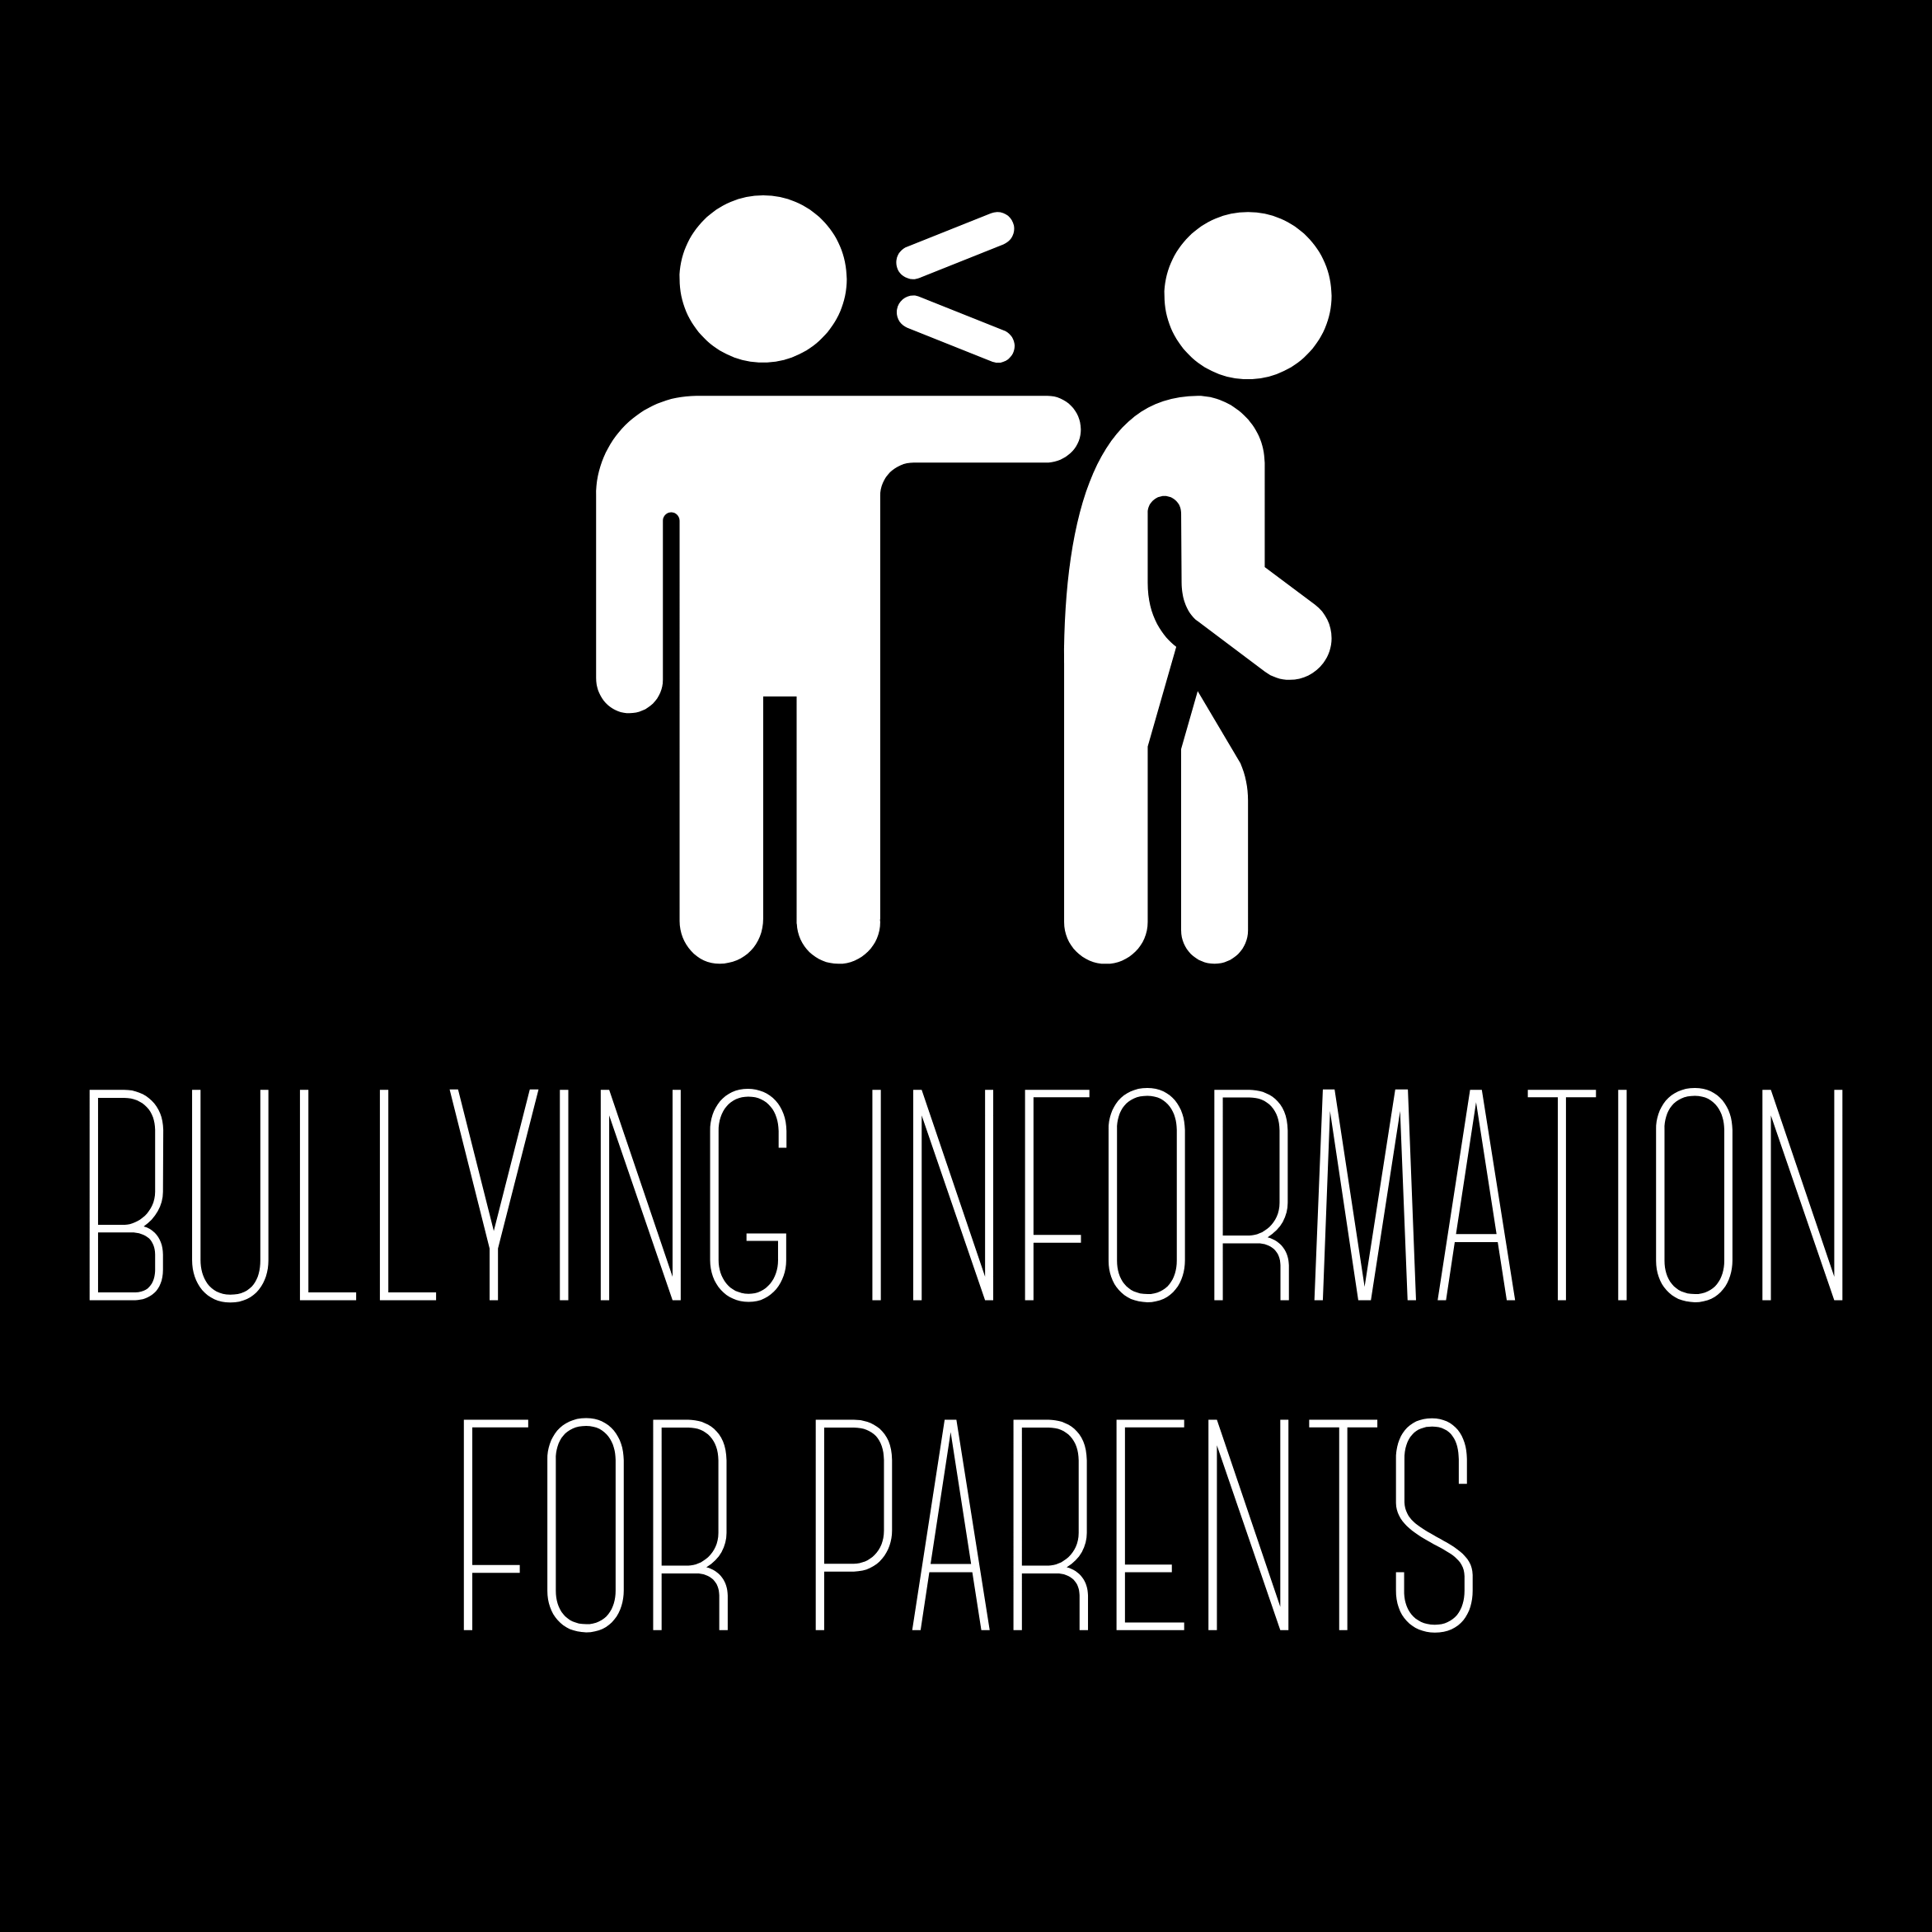 Bullying Information for Parents